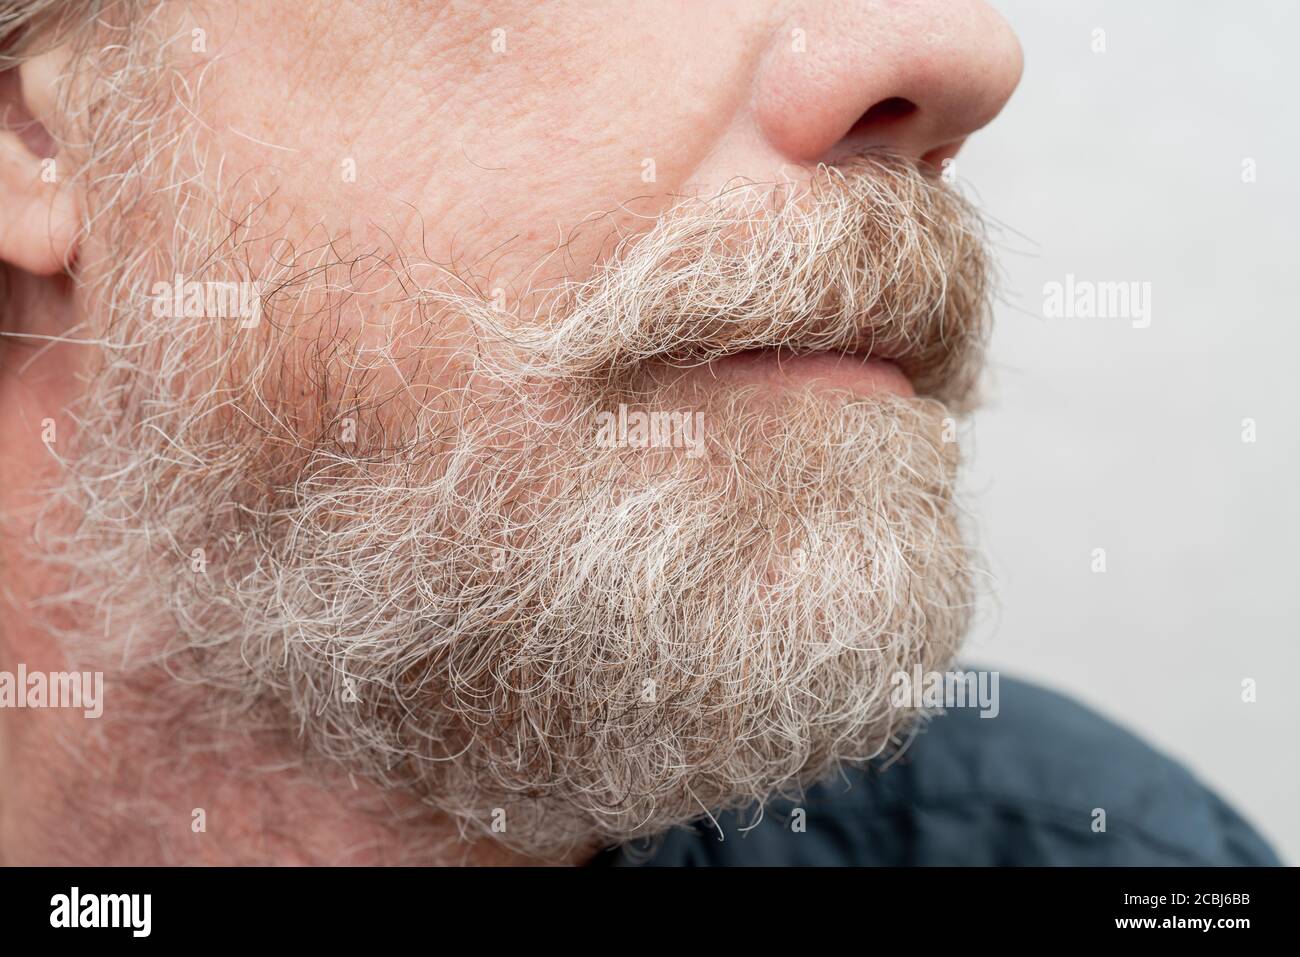 https://c8.alamy.com/comp/2CBJ6BB/a-gray-beard-and-a-twisted-mustache-of-an-old-hipster-2CBJ6BB.jpg